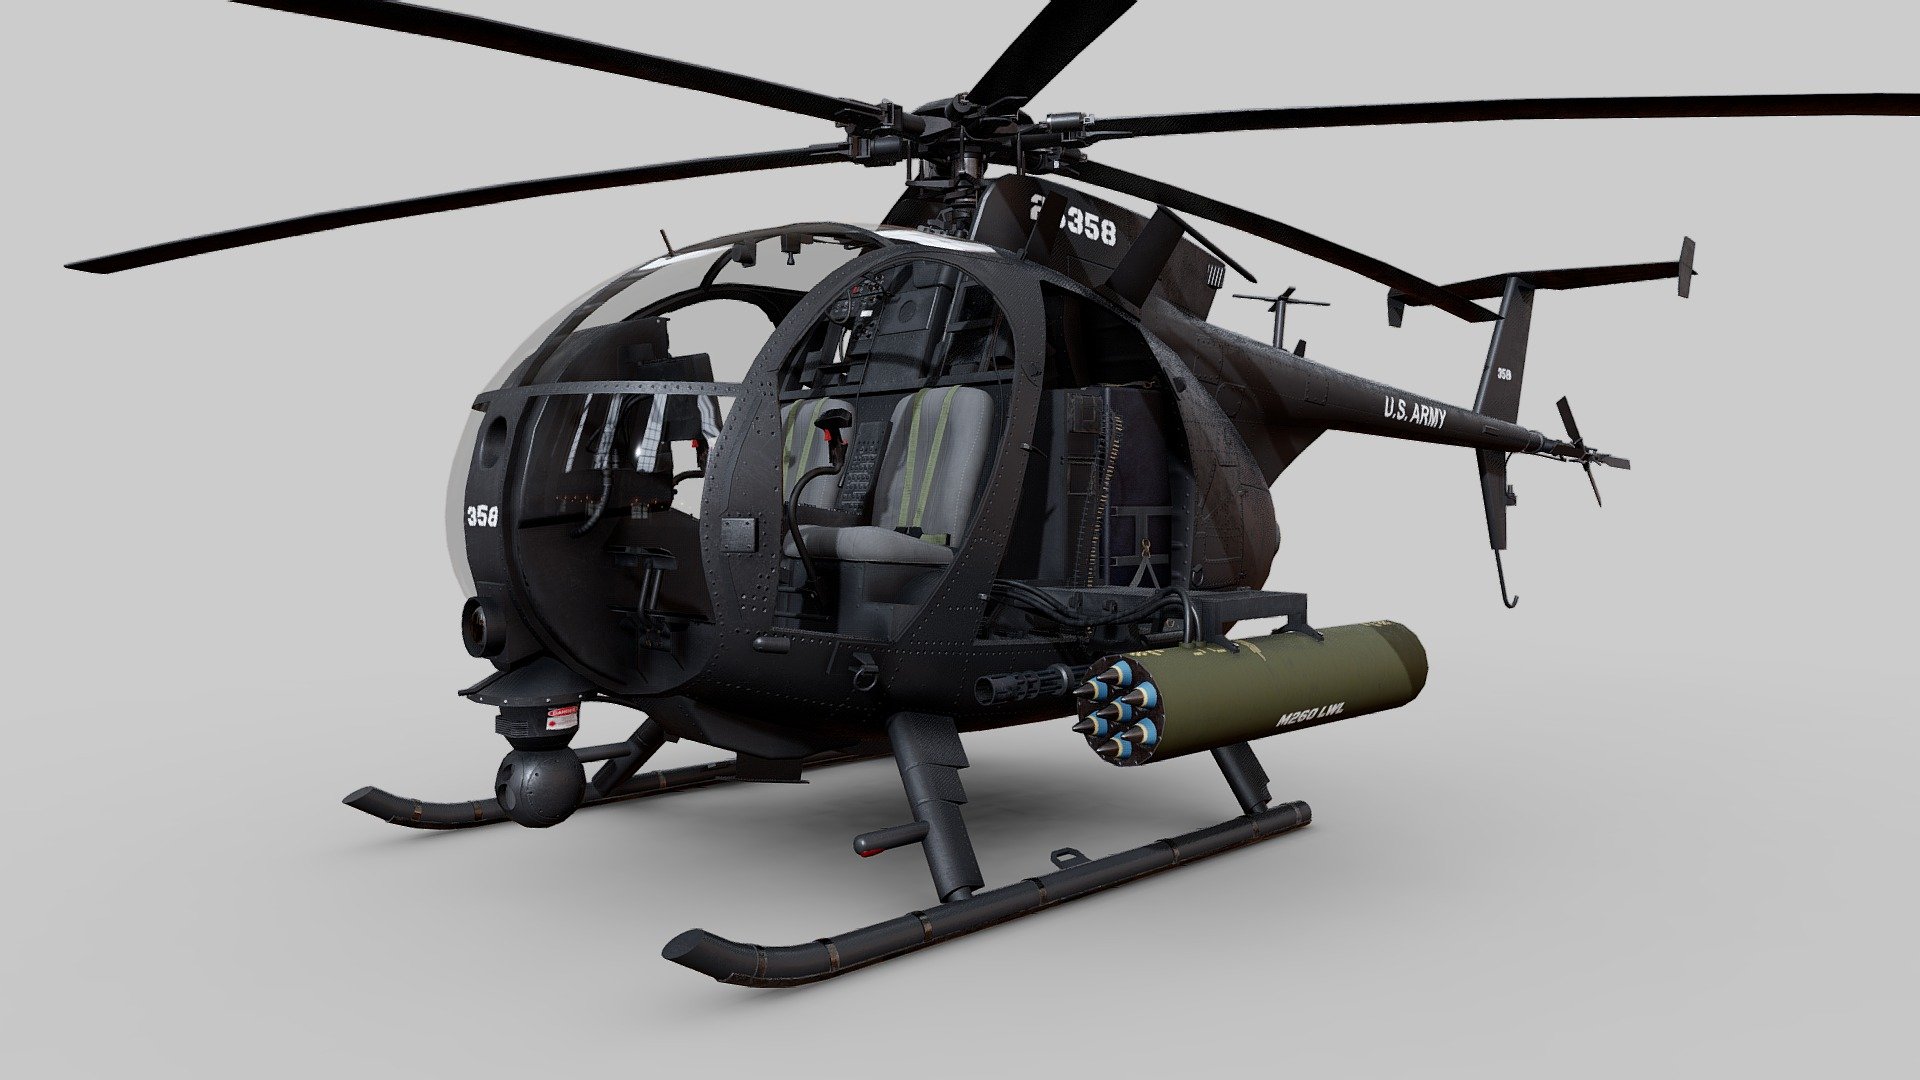 MH-6 Little Bird Helicopter


Full 3D modeled interior and cockpit
3D modeled indicators and separated objects
Organized workflow and files
Emission maps included
Substance Painter Project included to make your own skins

Fully UV unwrapped



File format: Blend FBX OBJ


Materials/Textures: PBR textures in substance painter
Material Maps: Base color, Roughness, Metallic, Normal, Emission
Texture resolution: 4k textures

Polycount:


Objects: 158
Vertices: 107.945
Edges: 198.885
Faces: 92.633
Triangles: 192.568
 - MH-6 Little Bird Helicopter - Buy Royalty Free 3D model by luisbcompany 3d model